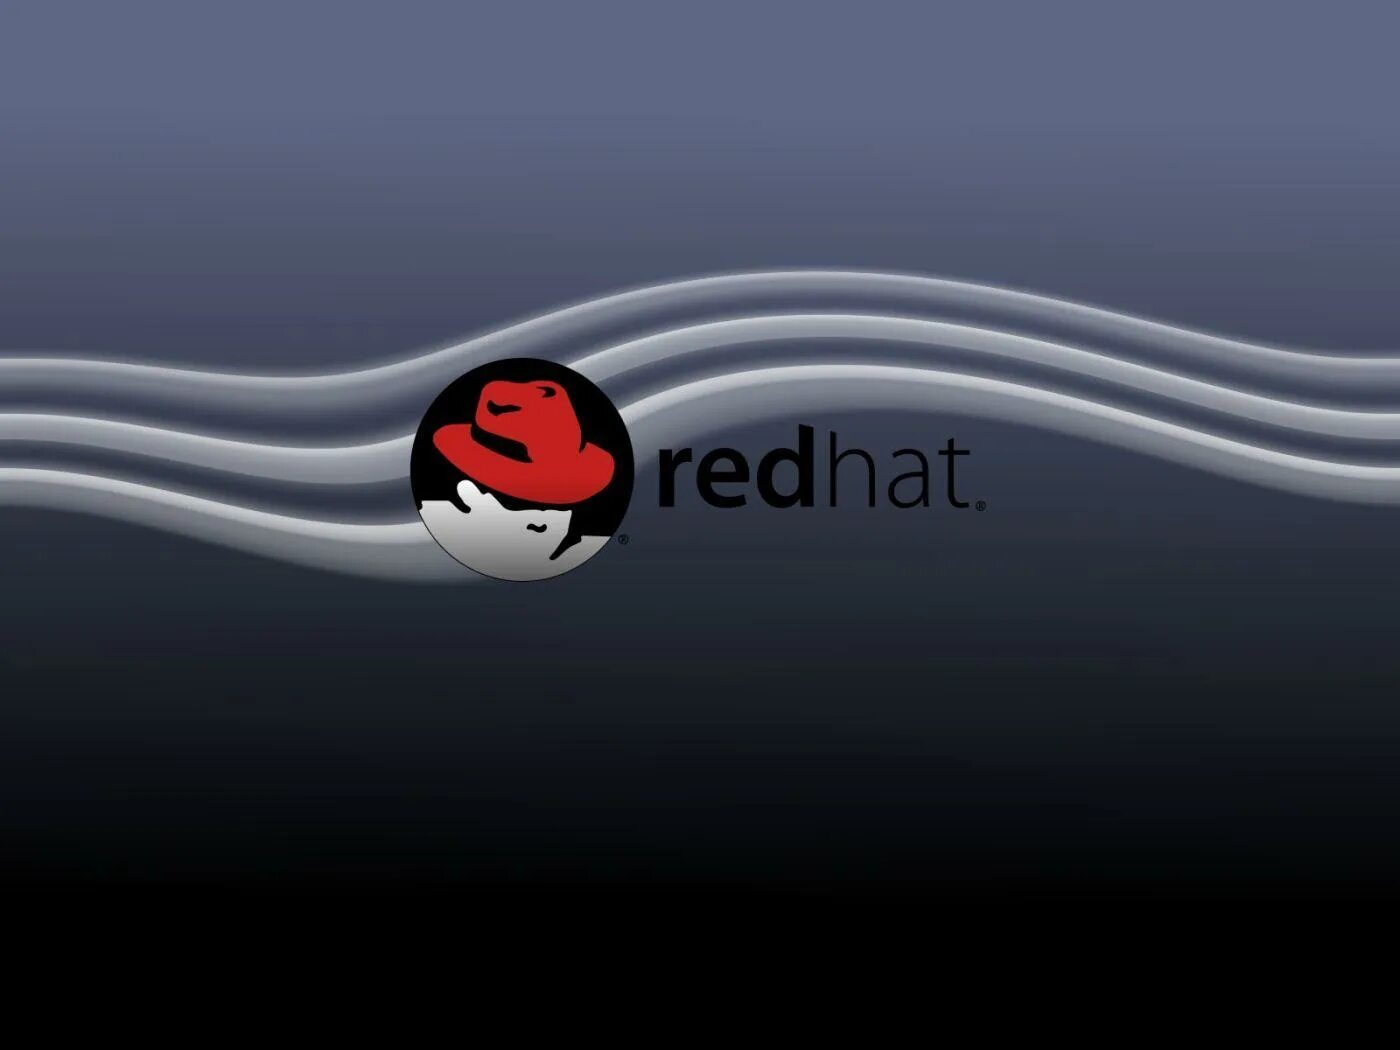 Редхат линукс. Обои Red hat. Red hat заставка. Red hat Linux Wallpaper. Red hat 7